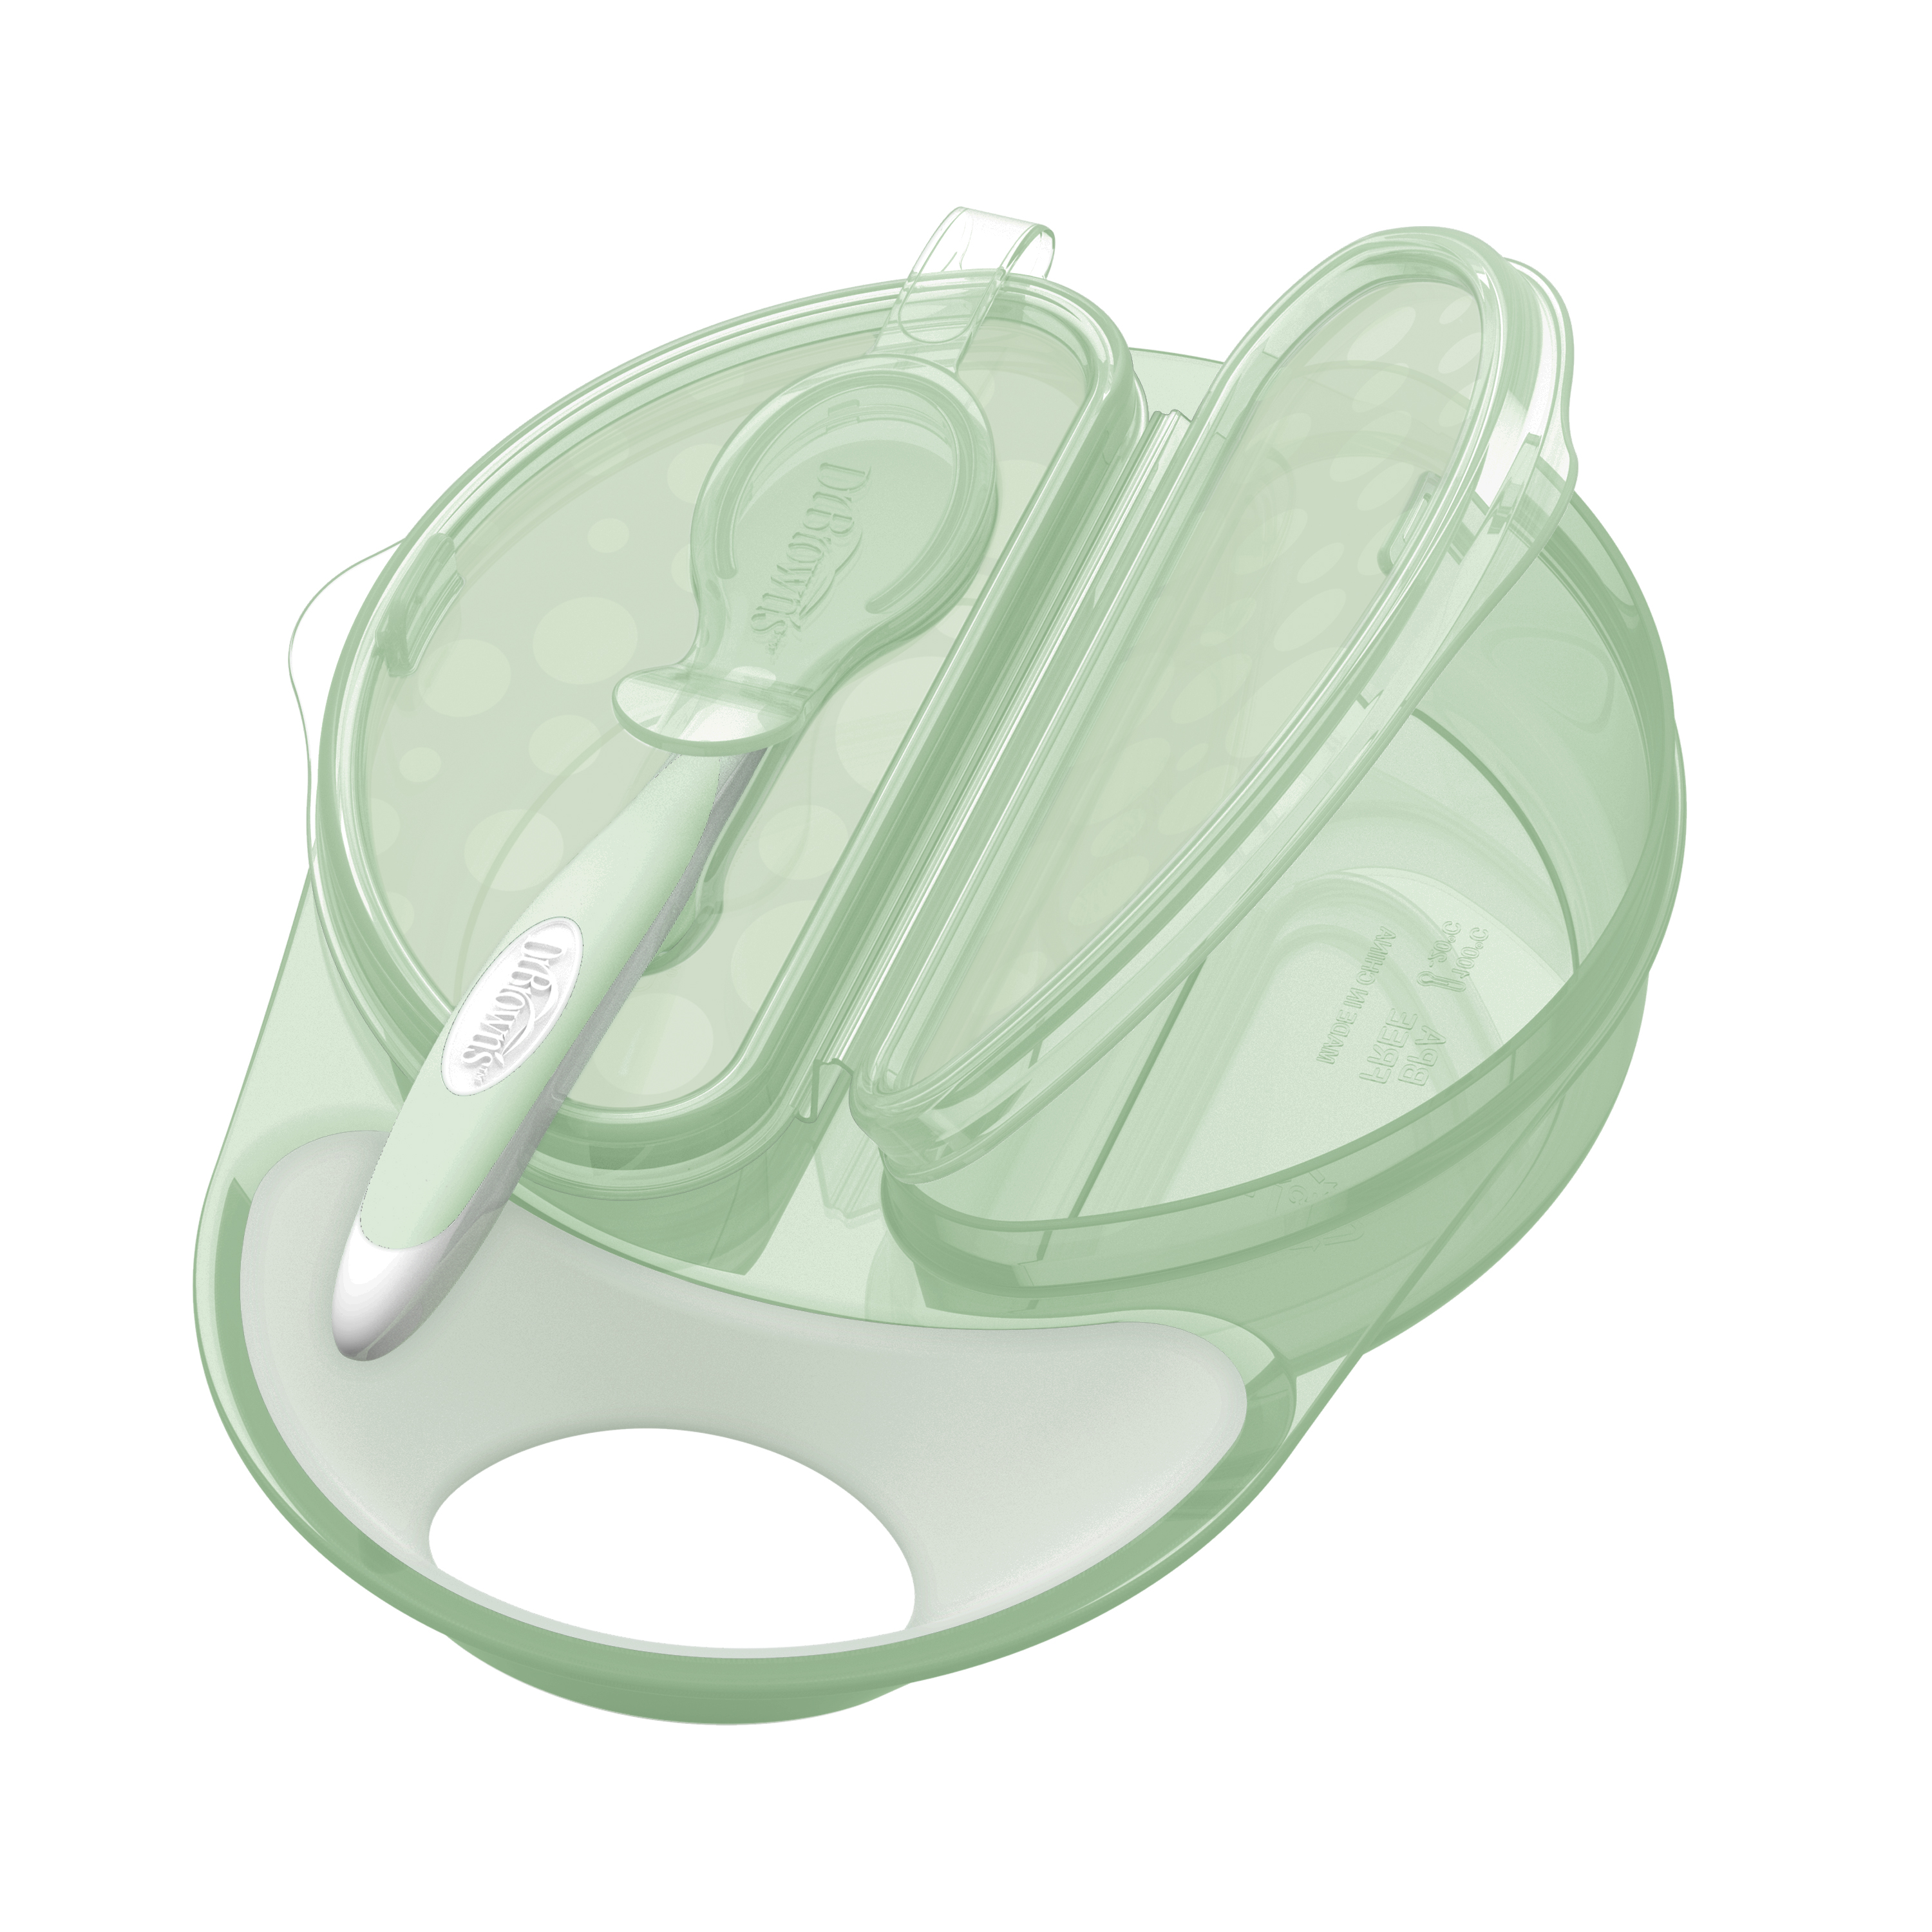 https://www.drbrownsbaby.com/wp-content/uploads/2019/12/TF010-P3_R1_Product_3Q_Bowl_and_Spoon_Set_Light-Green_Lid_Open.jpg